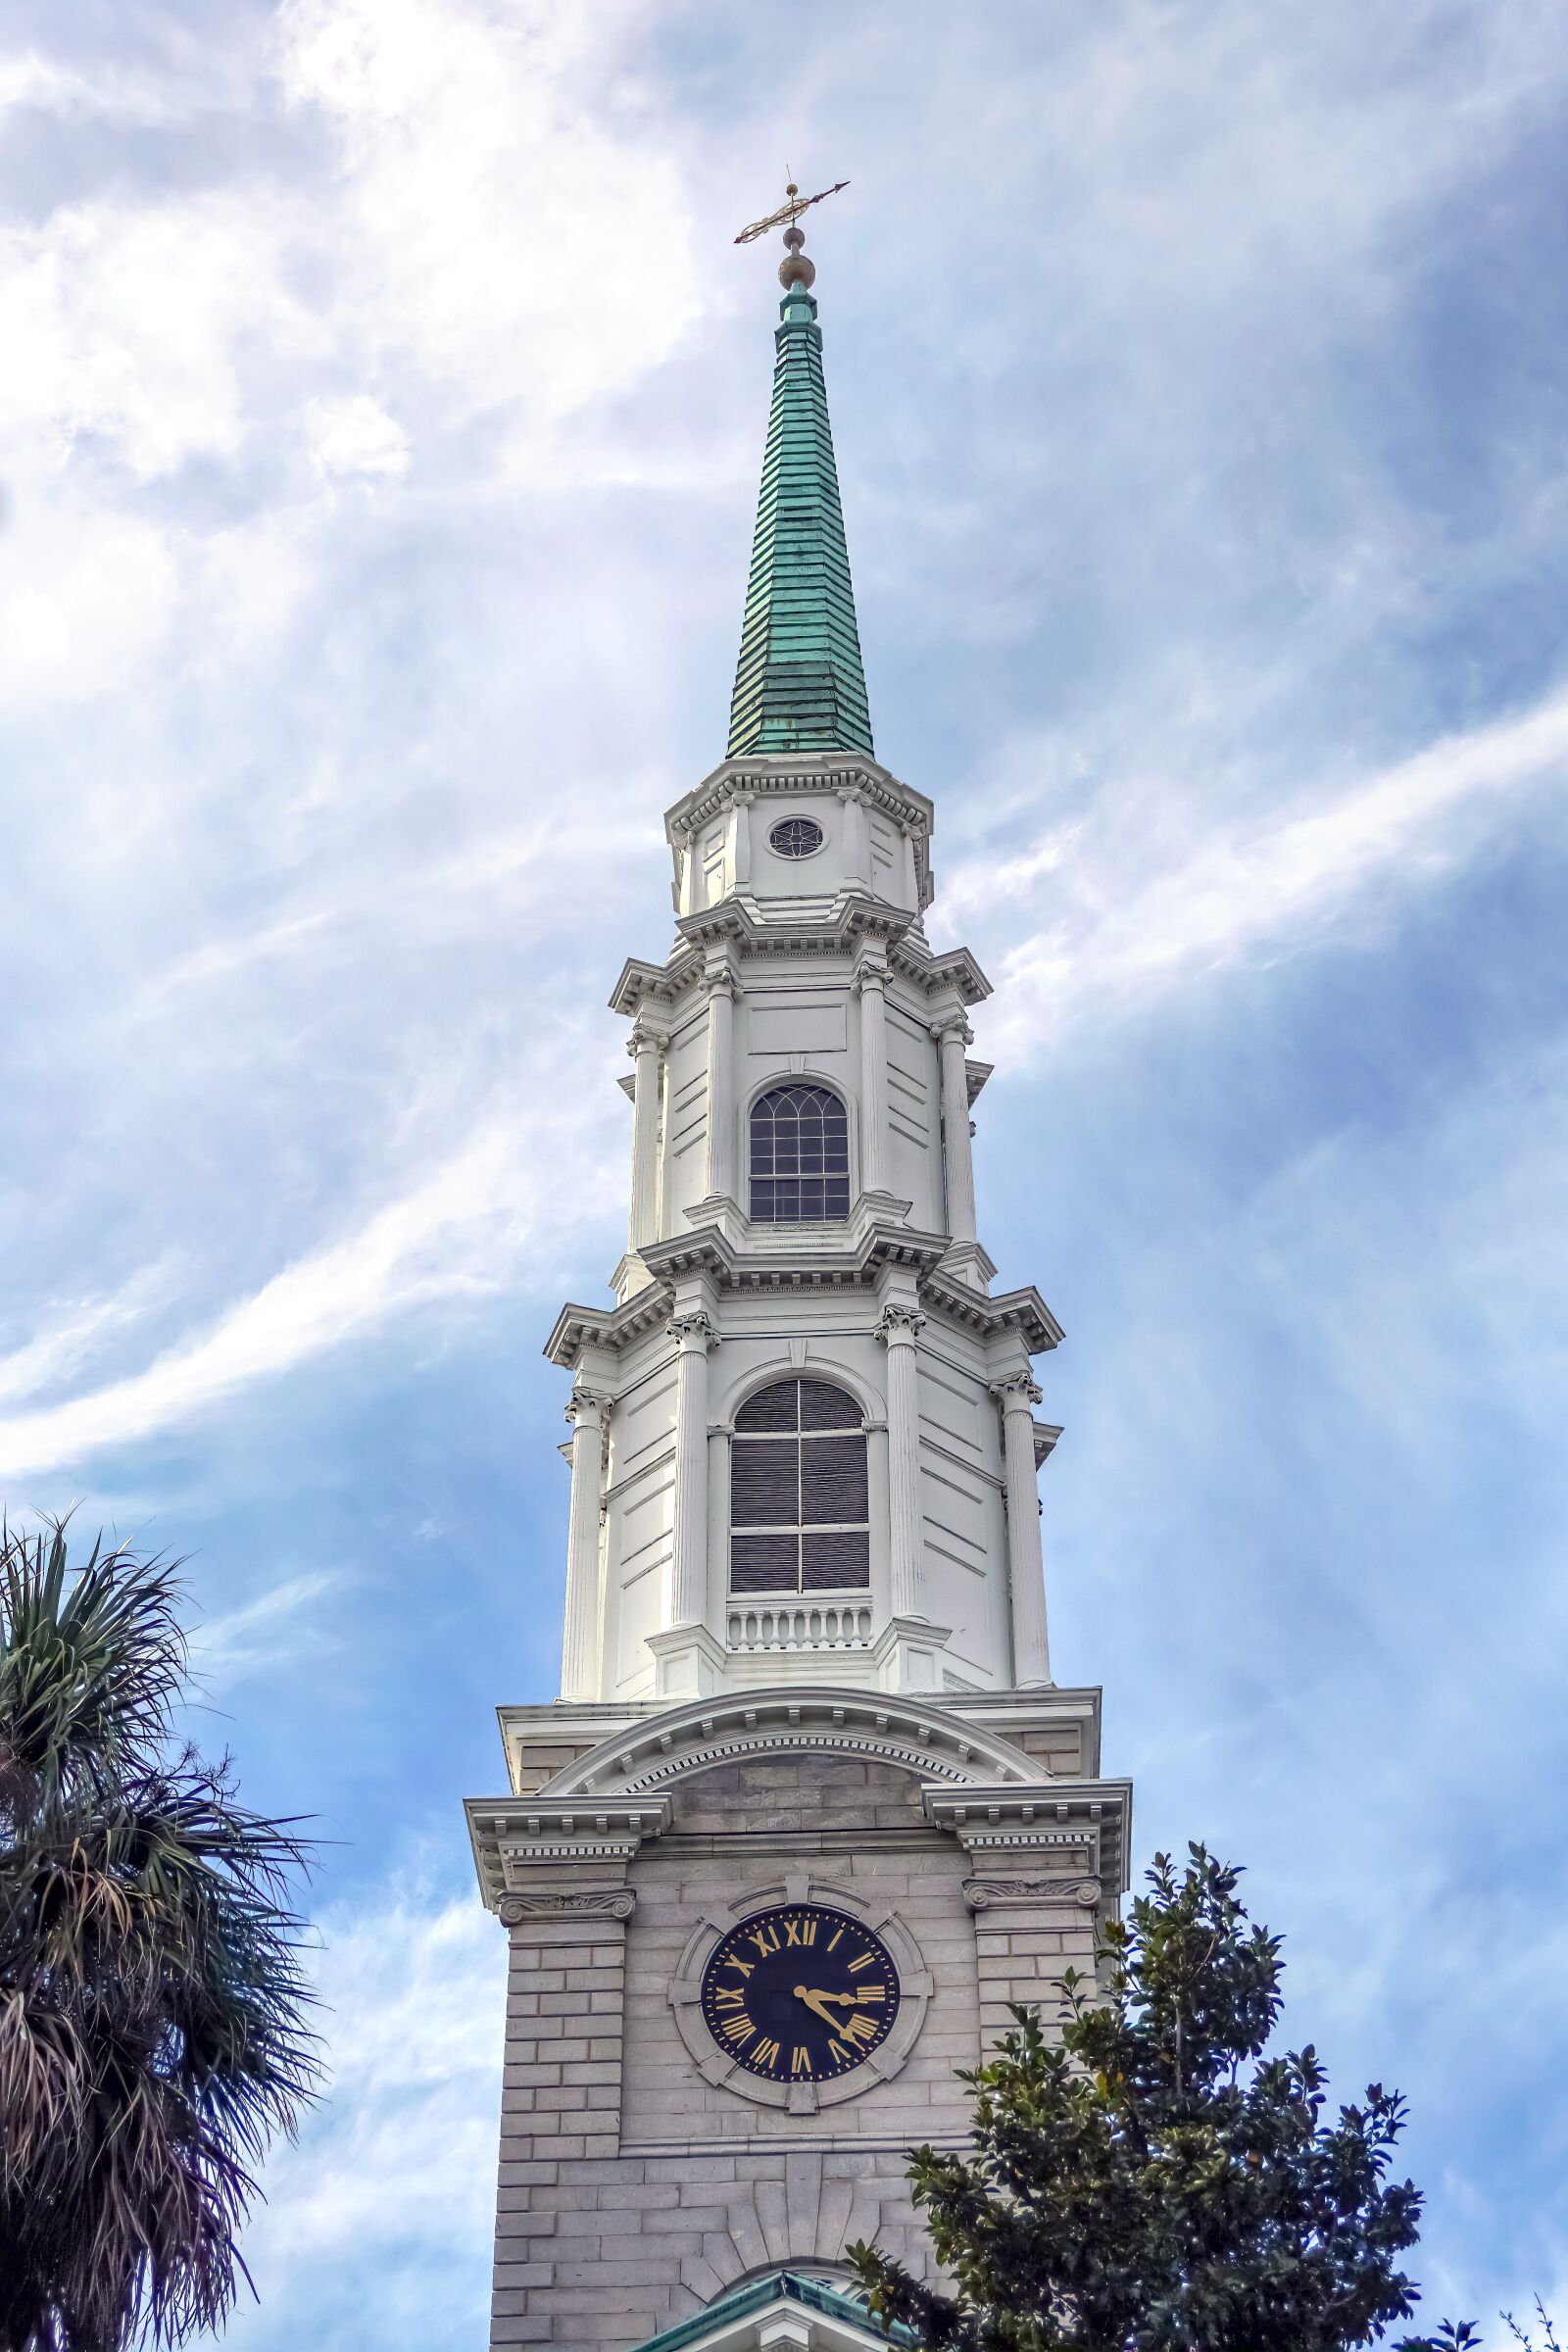 Sony a6300 sample photo. Church, steeple, architecture photography